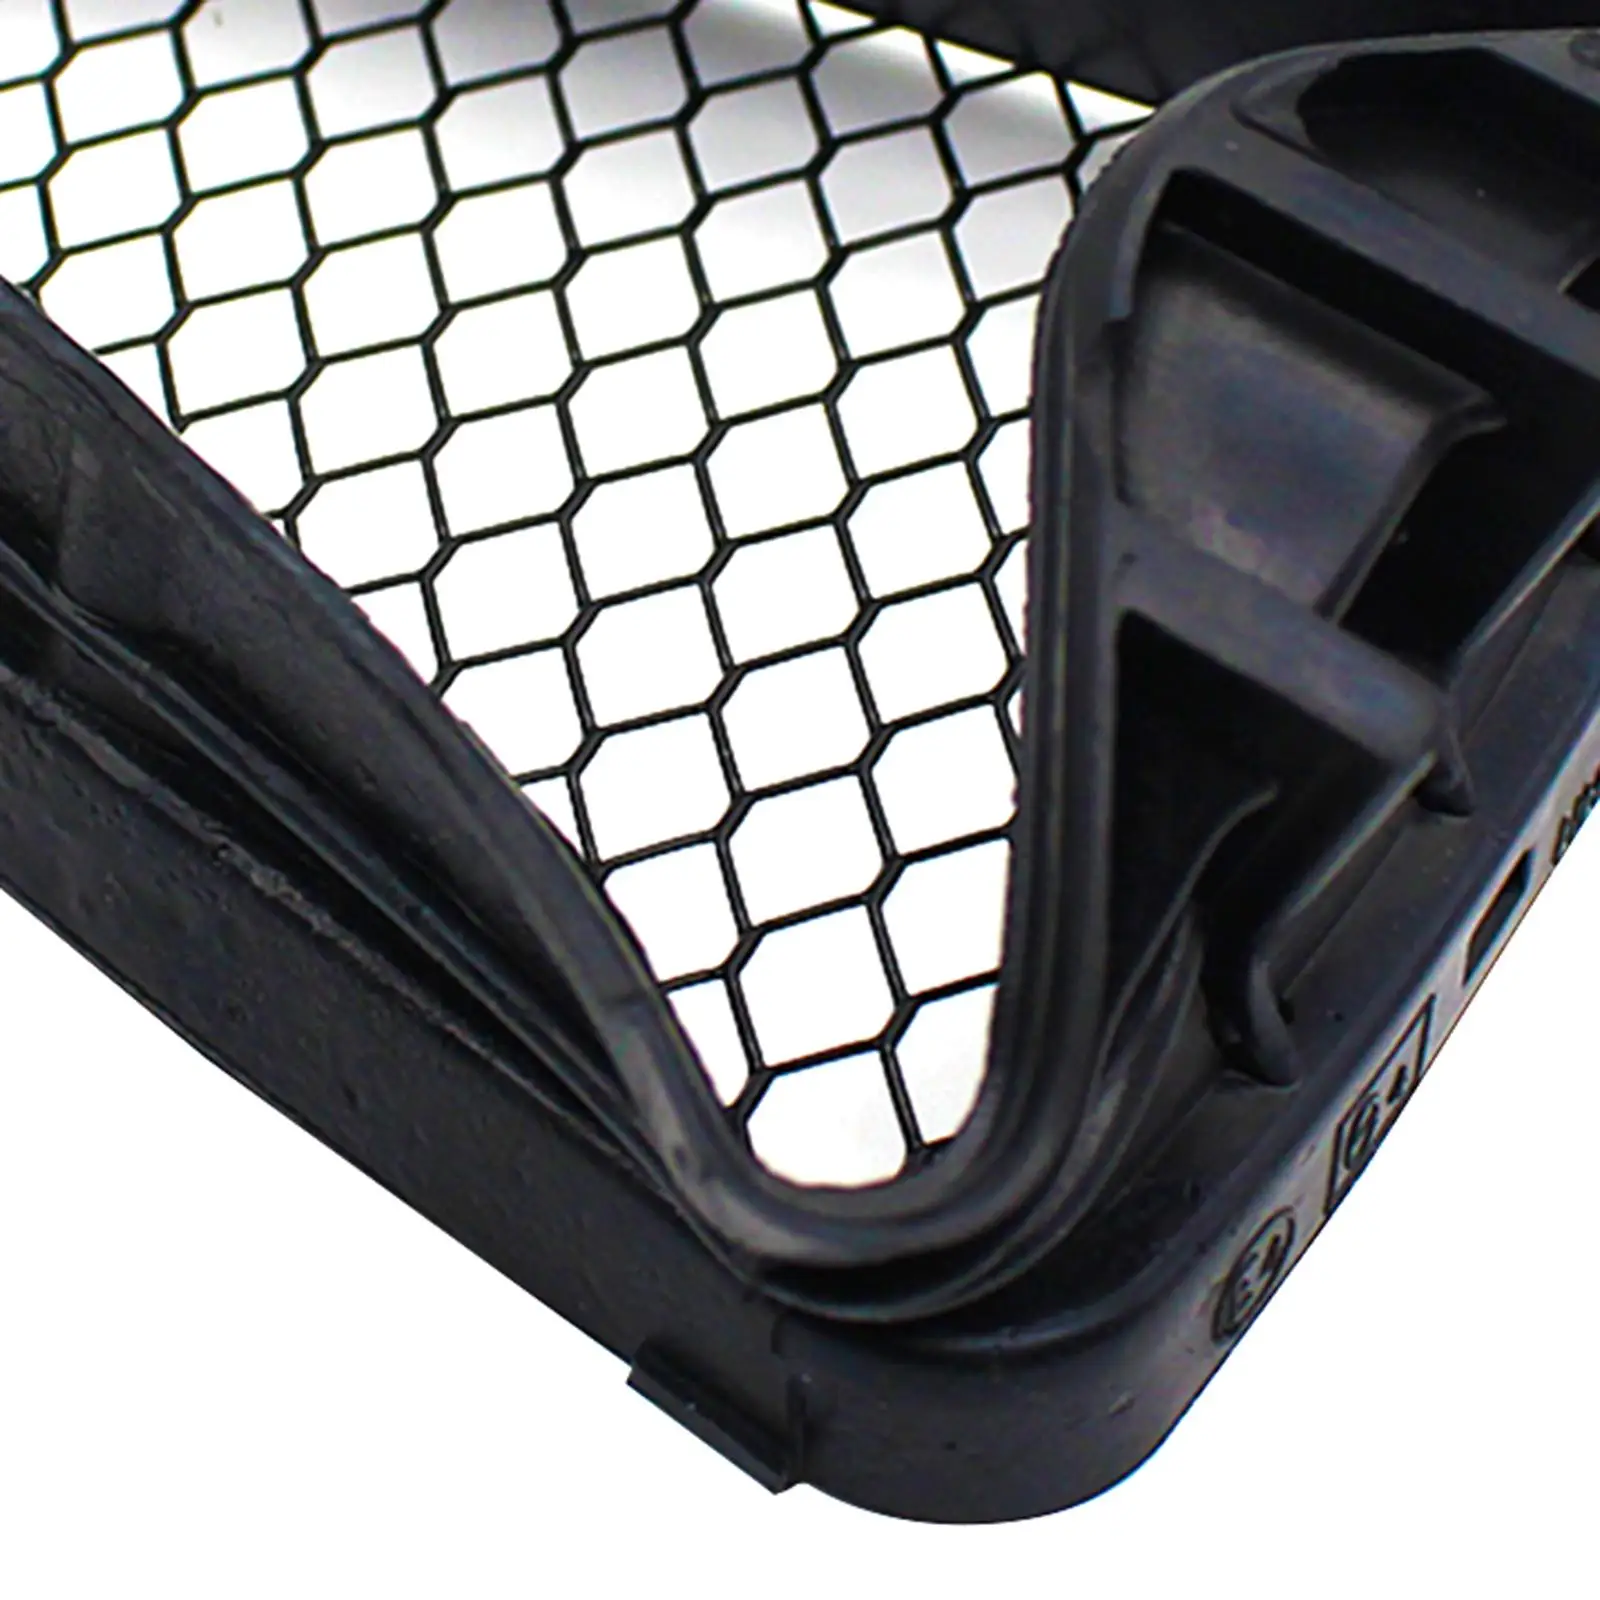 Air Intake Duct Net Cover Replacement Black for CBR600Rr 2007-2012